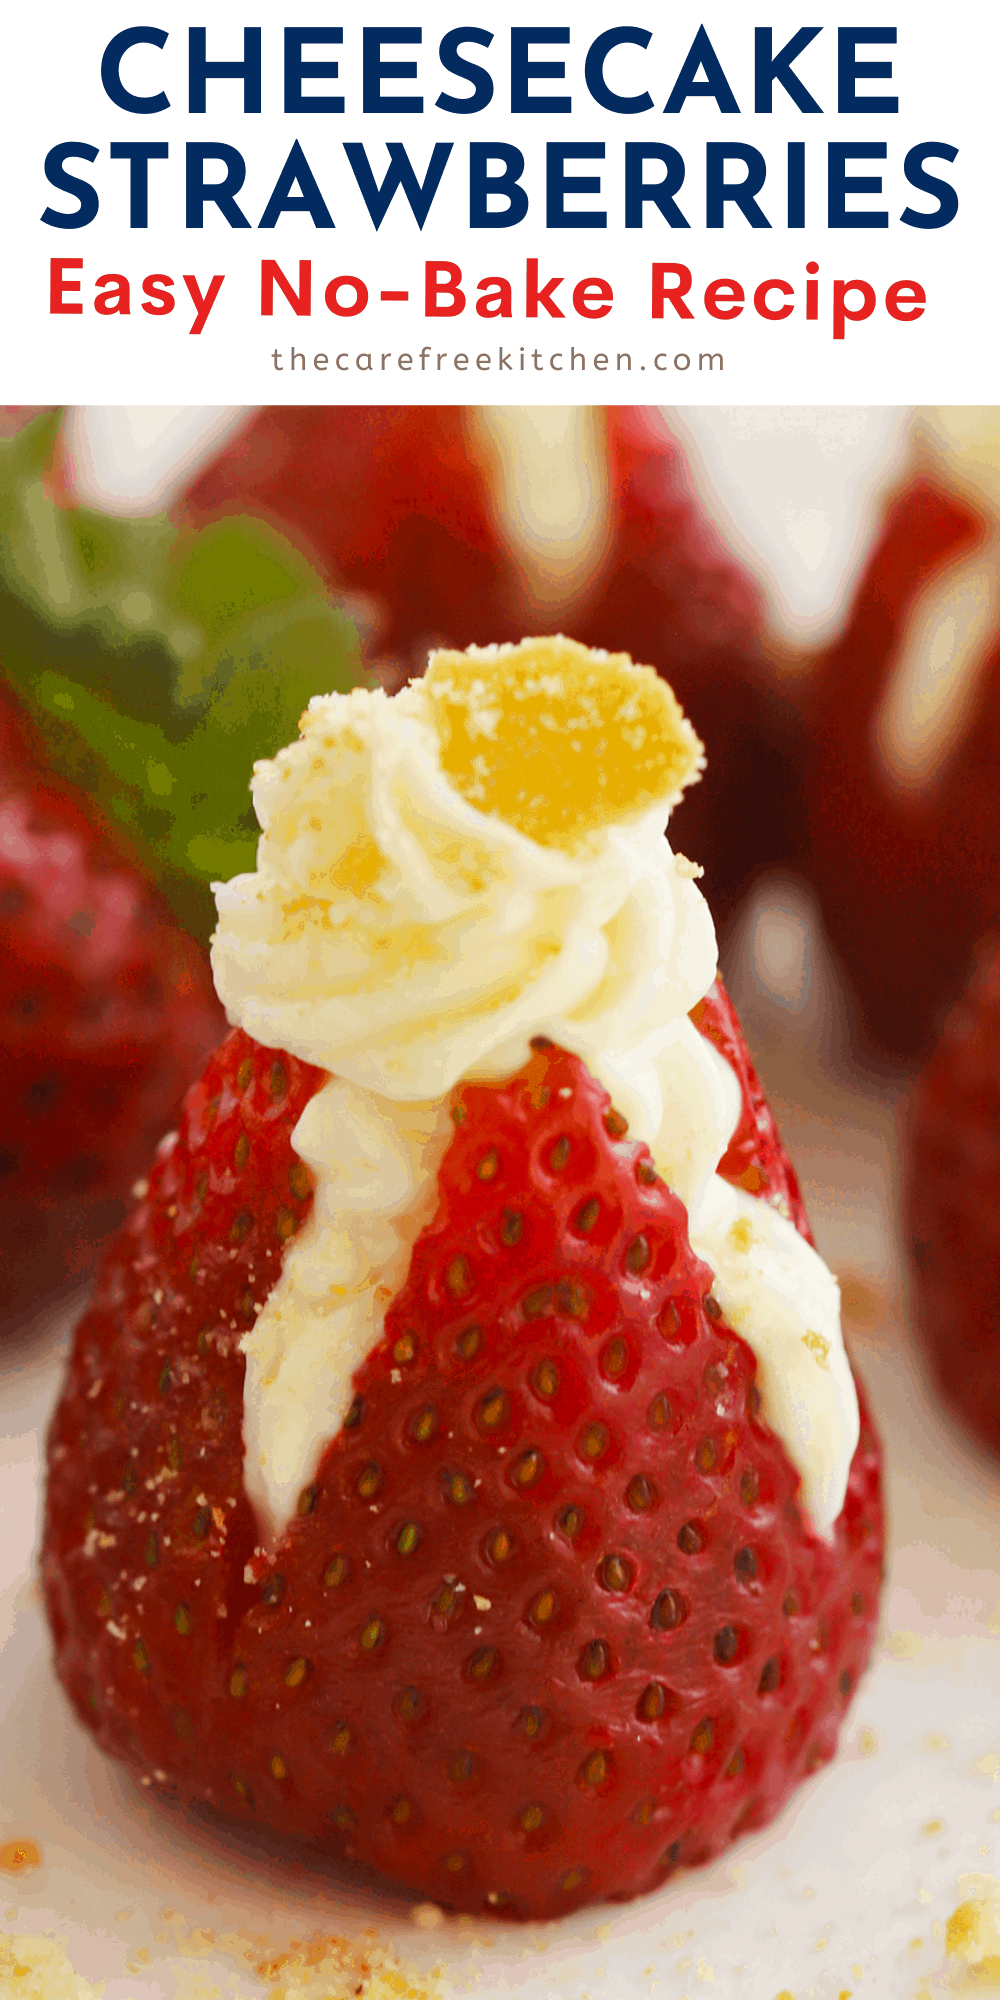 pinterest pin for Cheesecake stuffed strawberries, strawberries filled with cream cheese, strawberry with cheesecake filling, strawberries stuffed with cheesecake. 